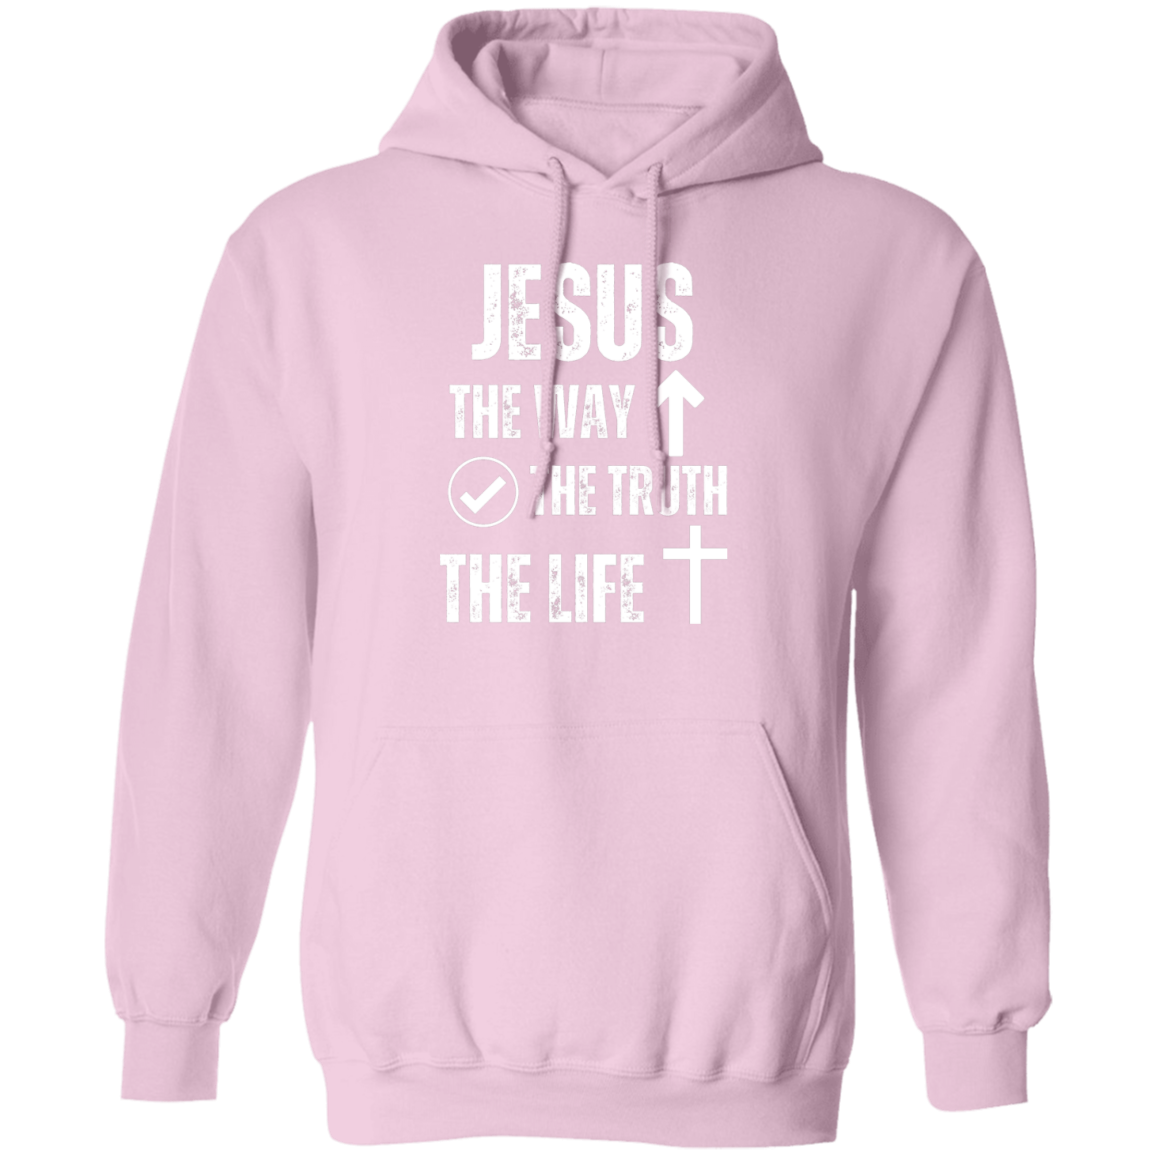 Jesus - The Way, The Truth, The Life Pullover Hoodie